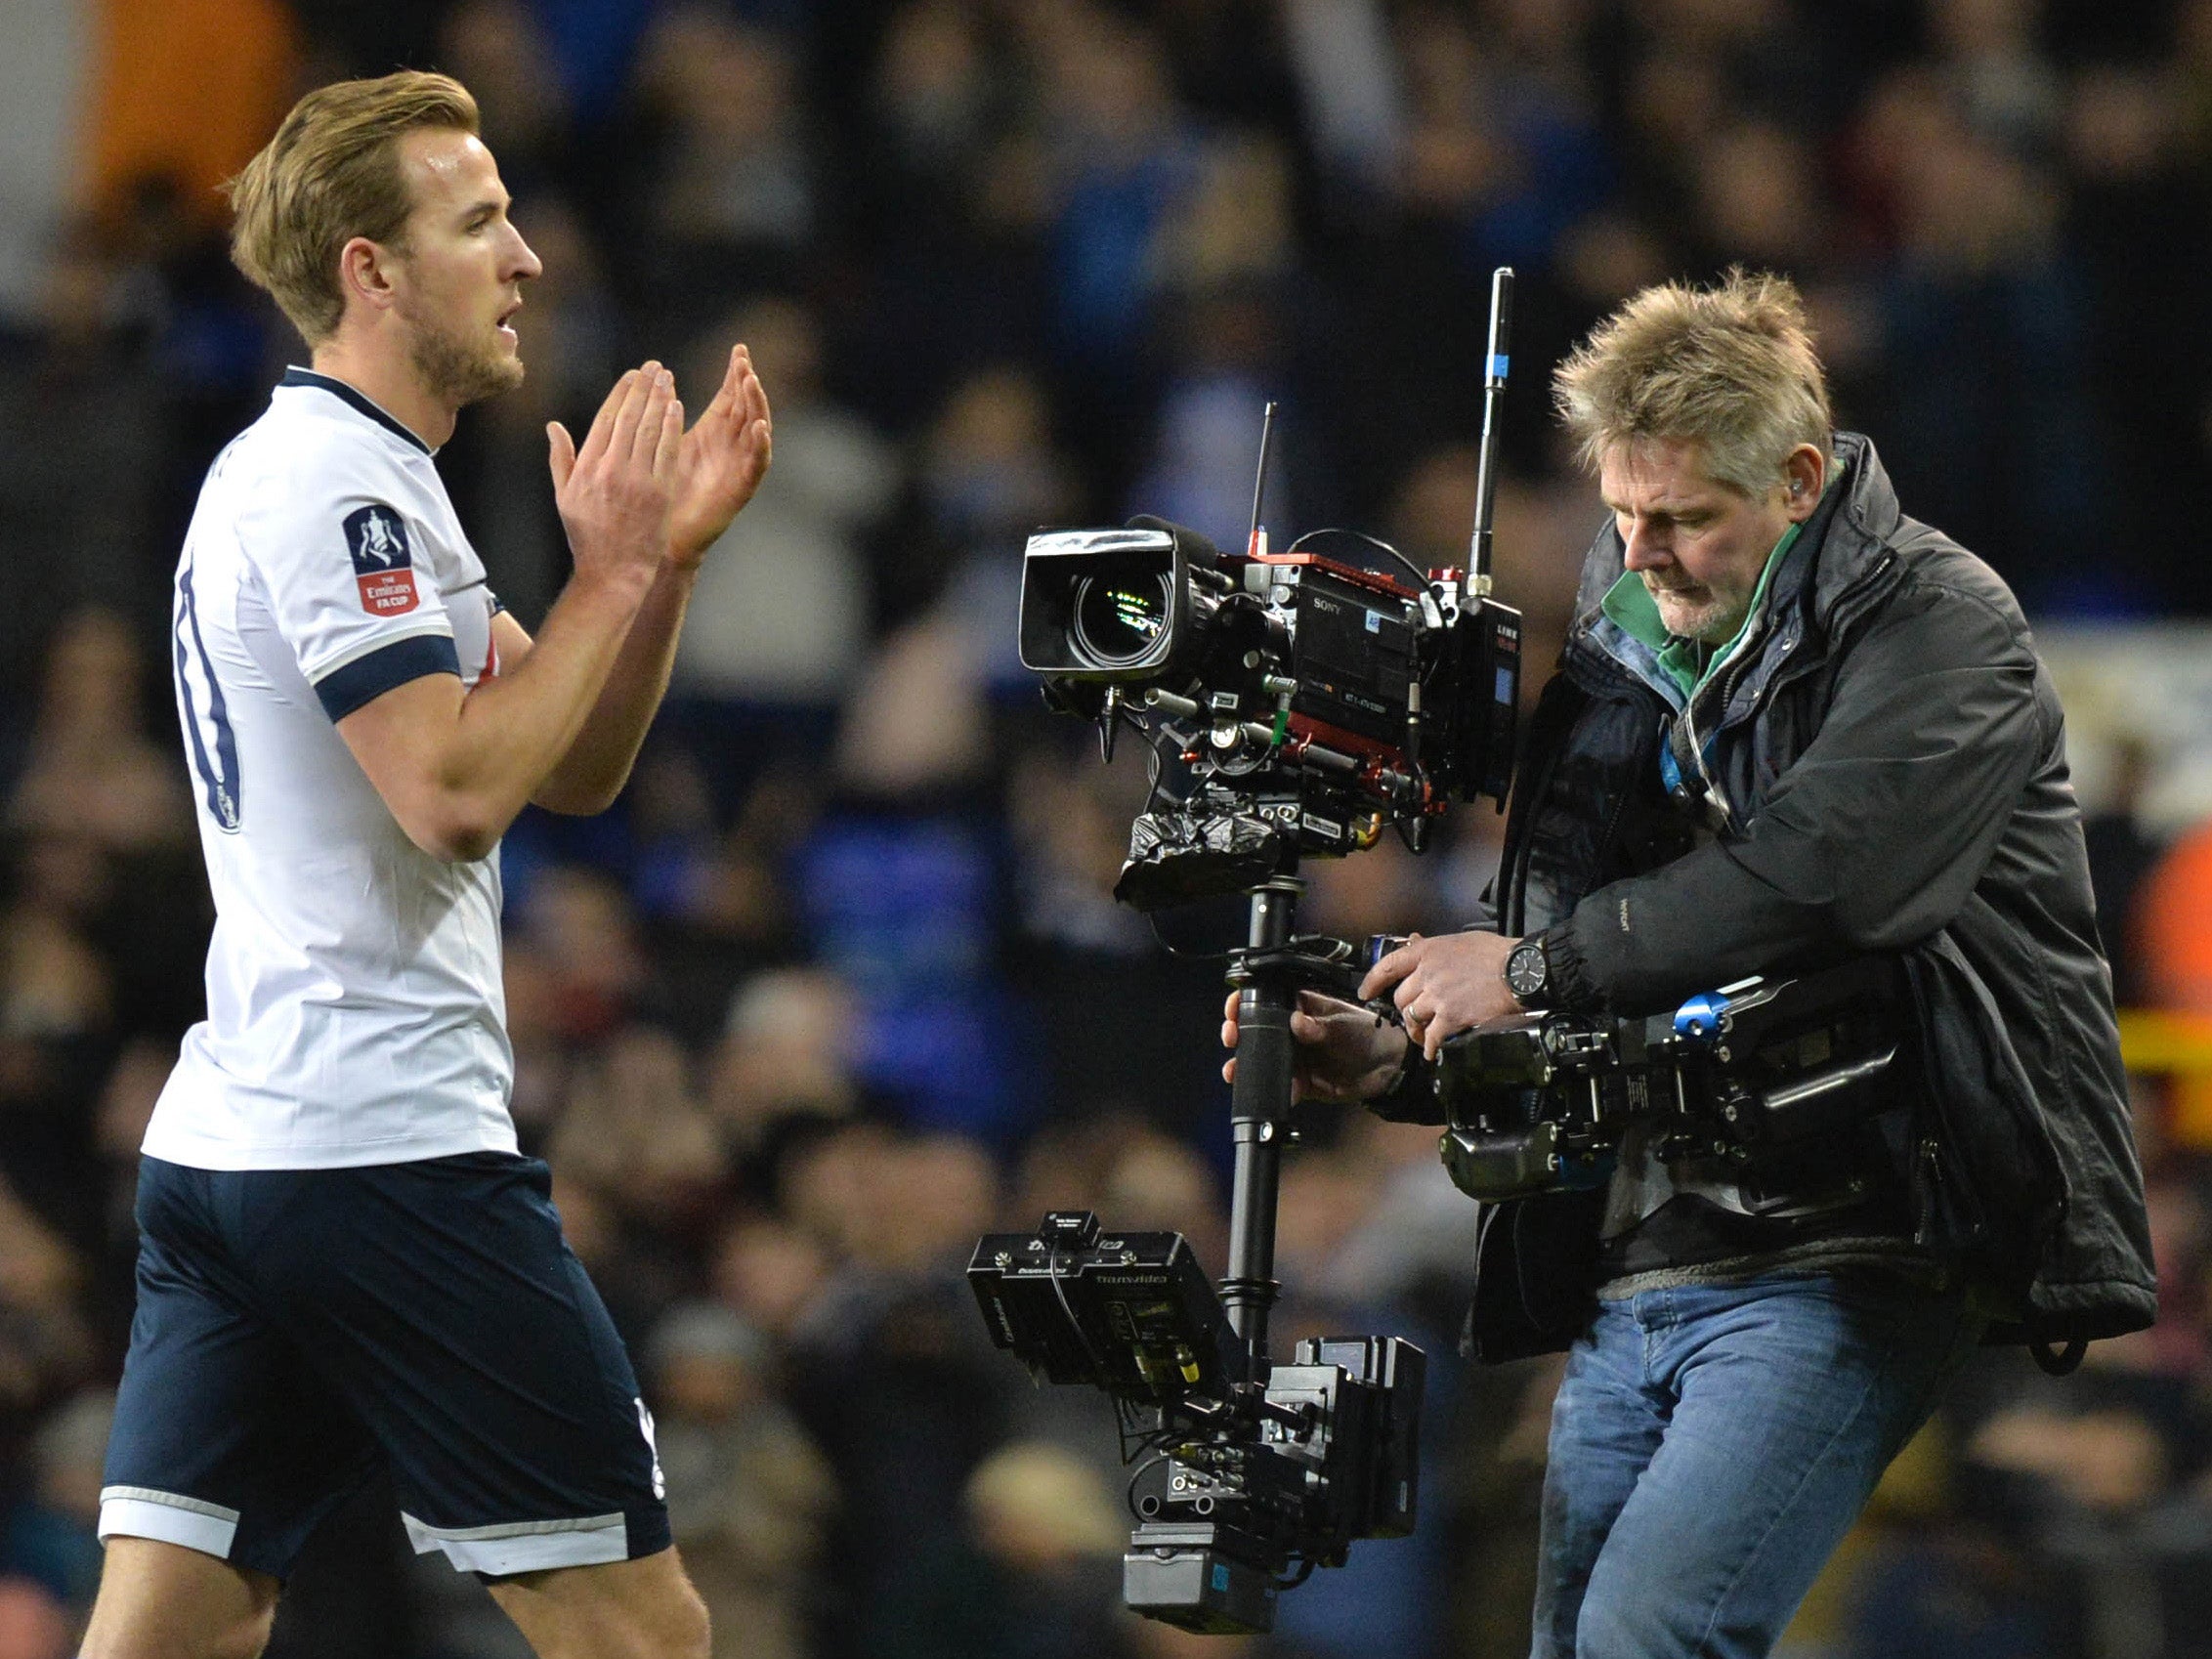 Harry Kane is the man of the moment after equalising against Leicester City in the FA Cup